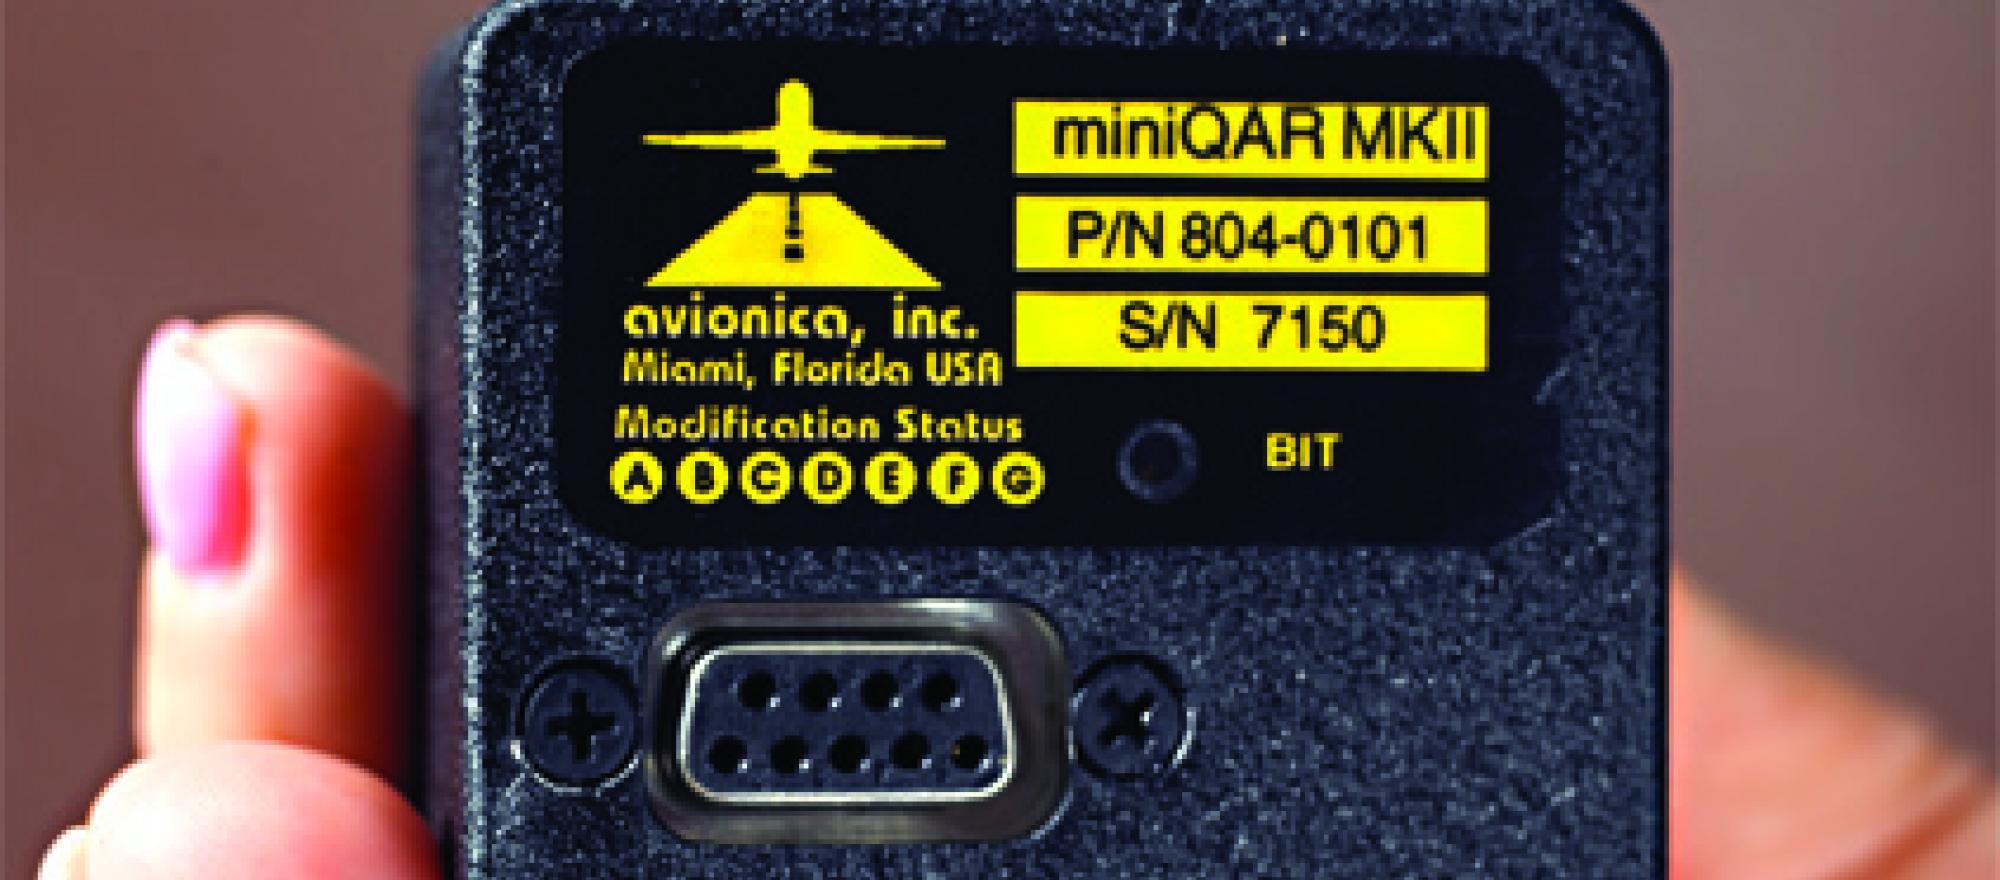 Flight data recorders, or “black boxes,” are actually bright yellow or orange